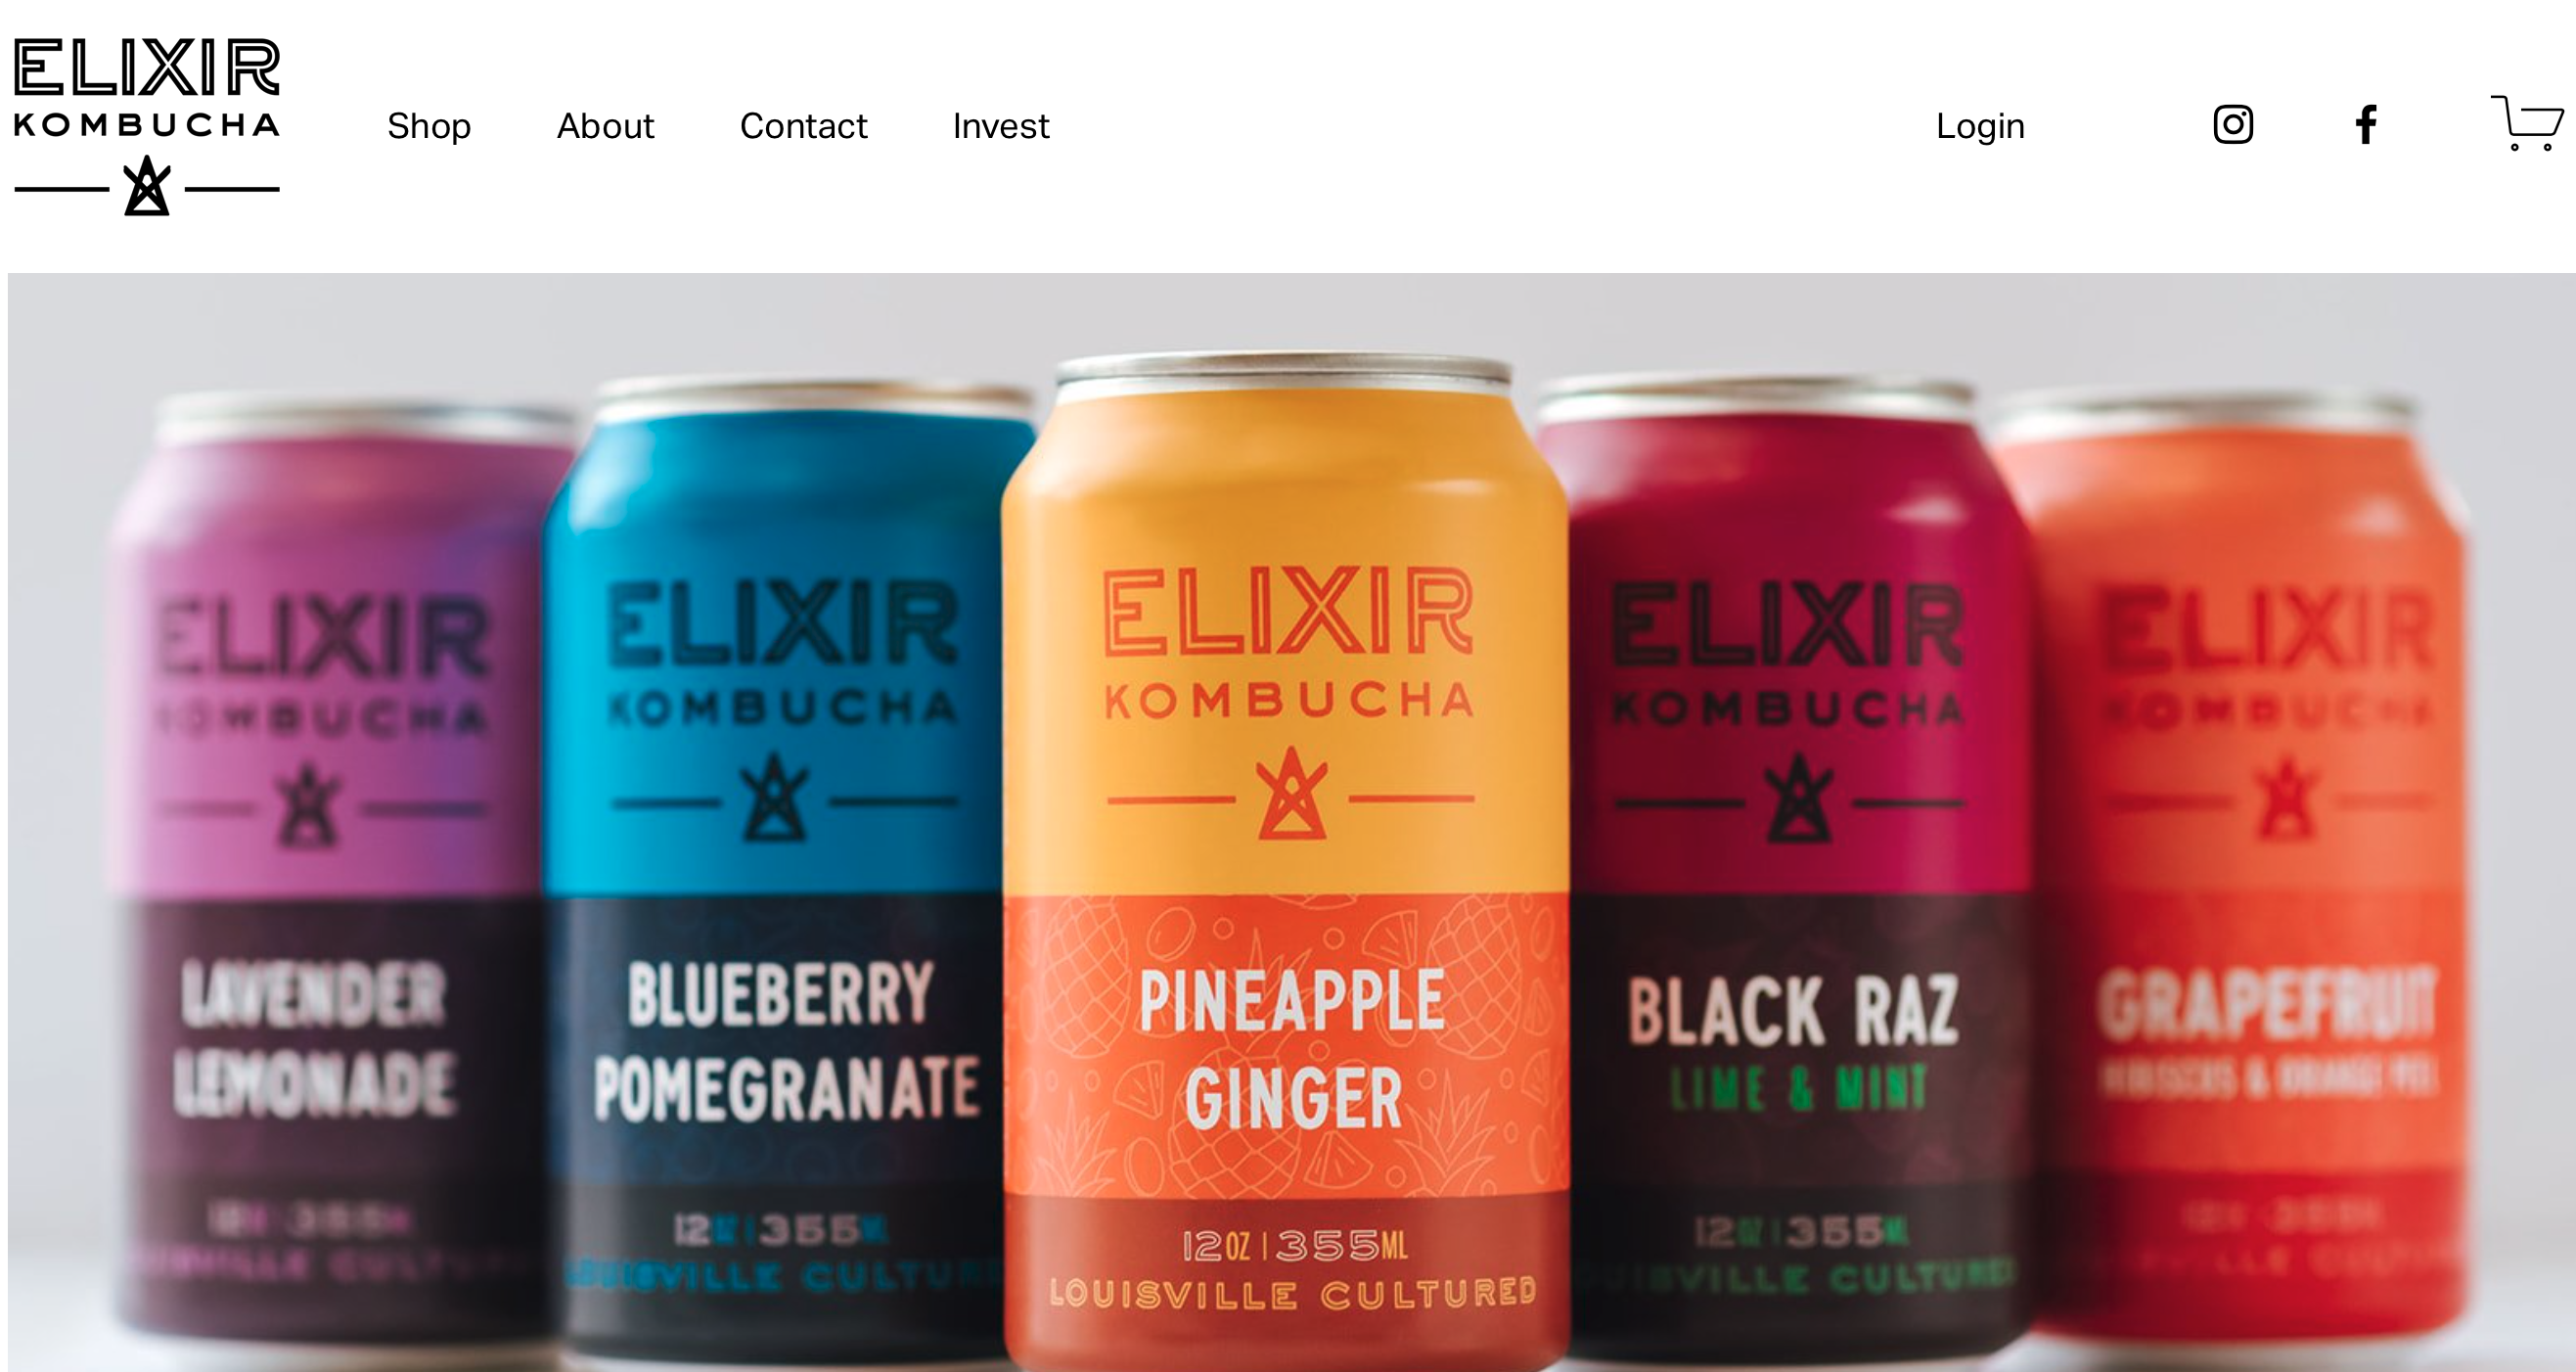 The homepage of Elixir Kombucha's website, featuring their 5 signature flavors